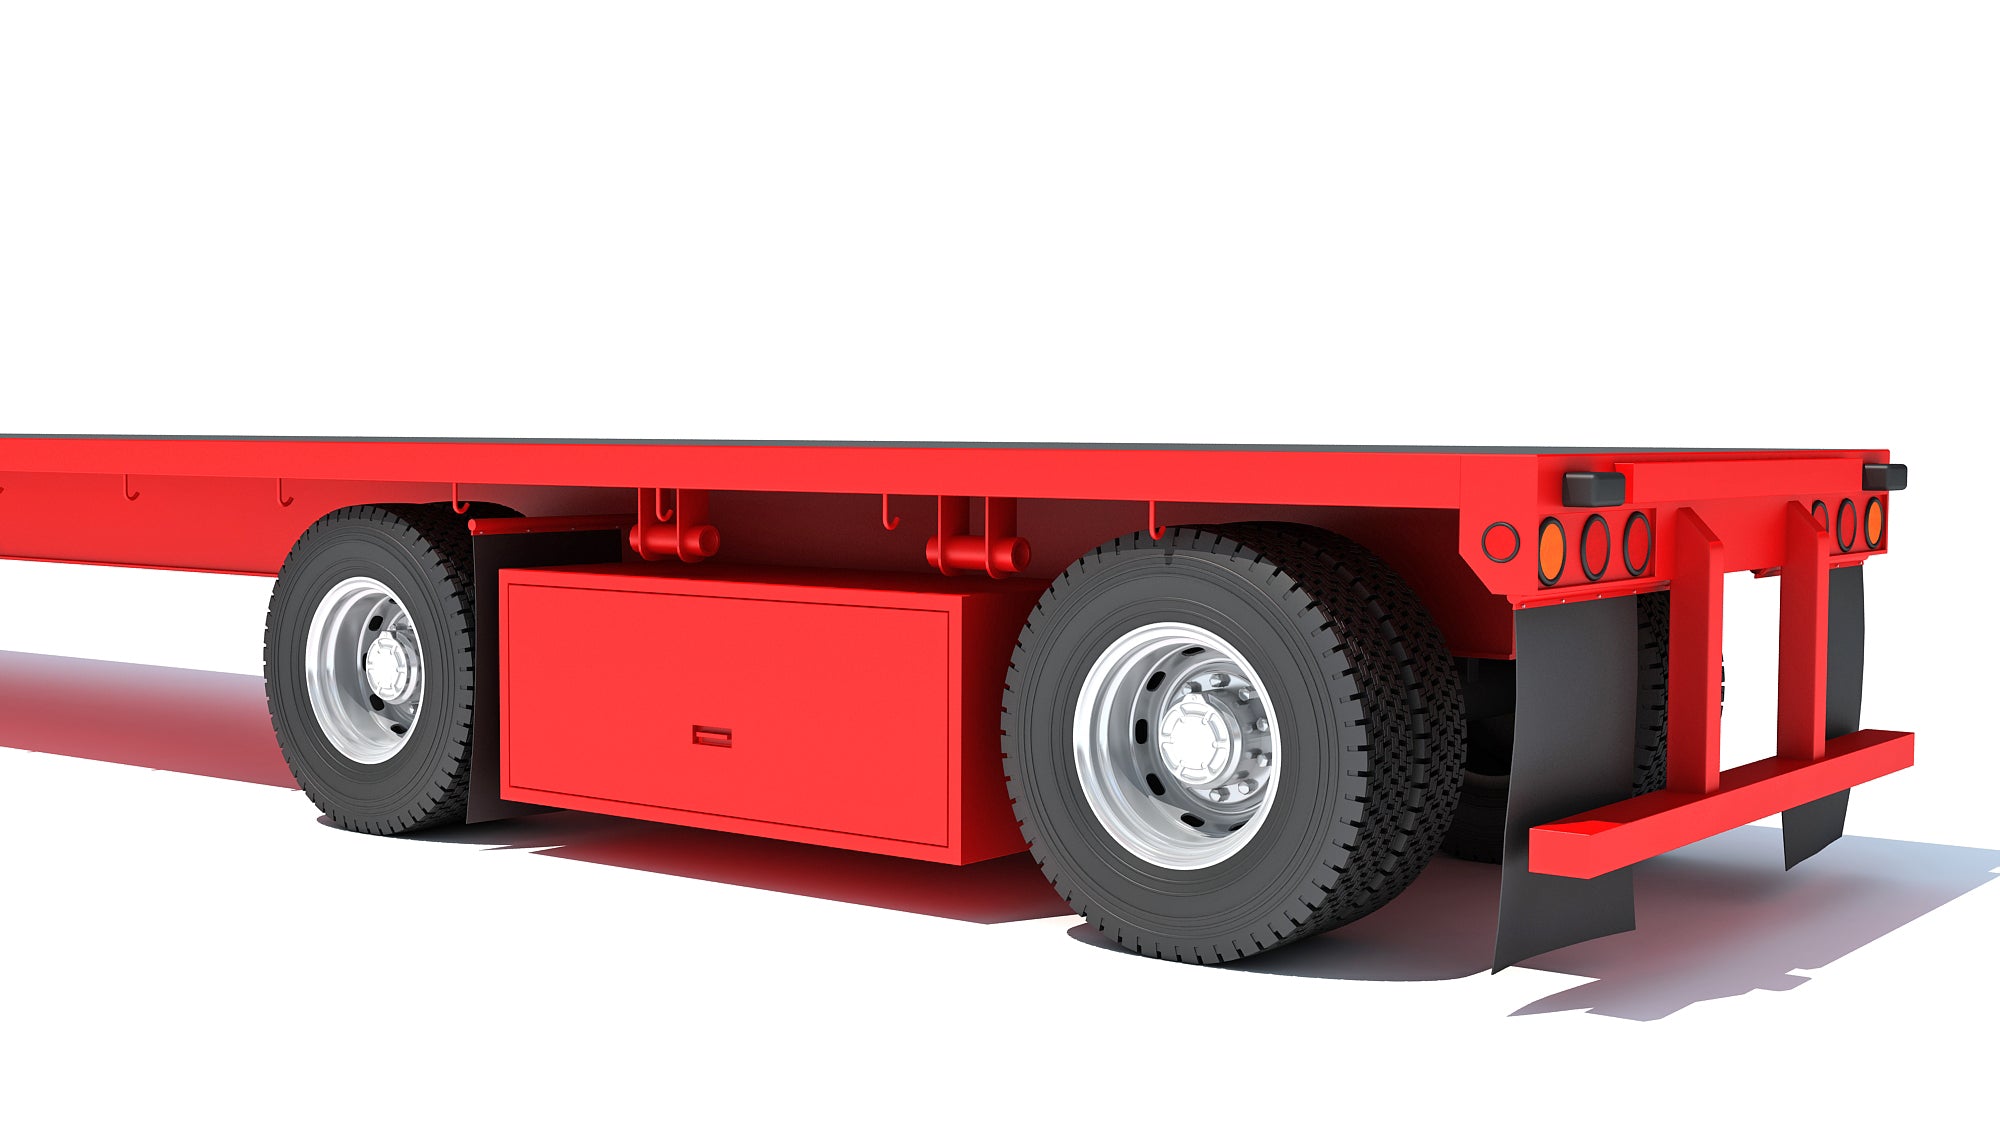 Truck with Flatbed Trailer Kenworth